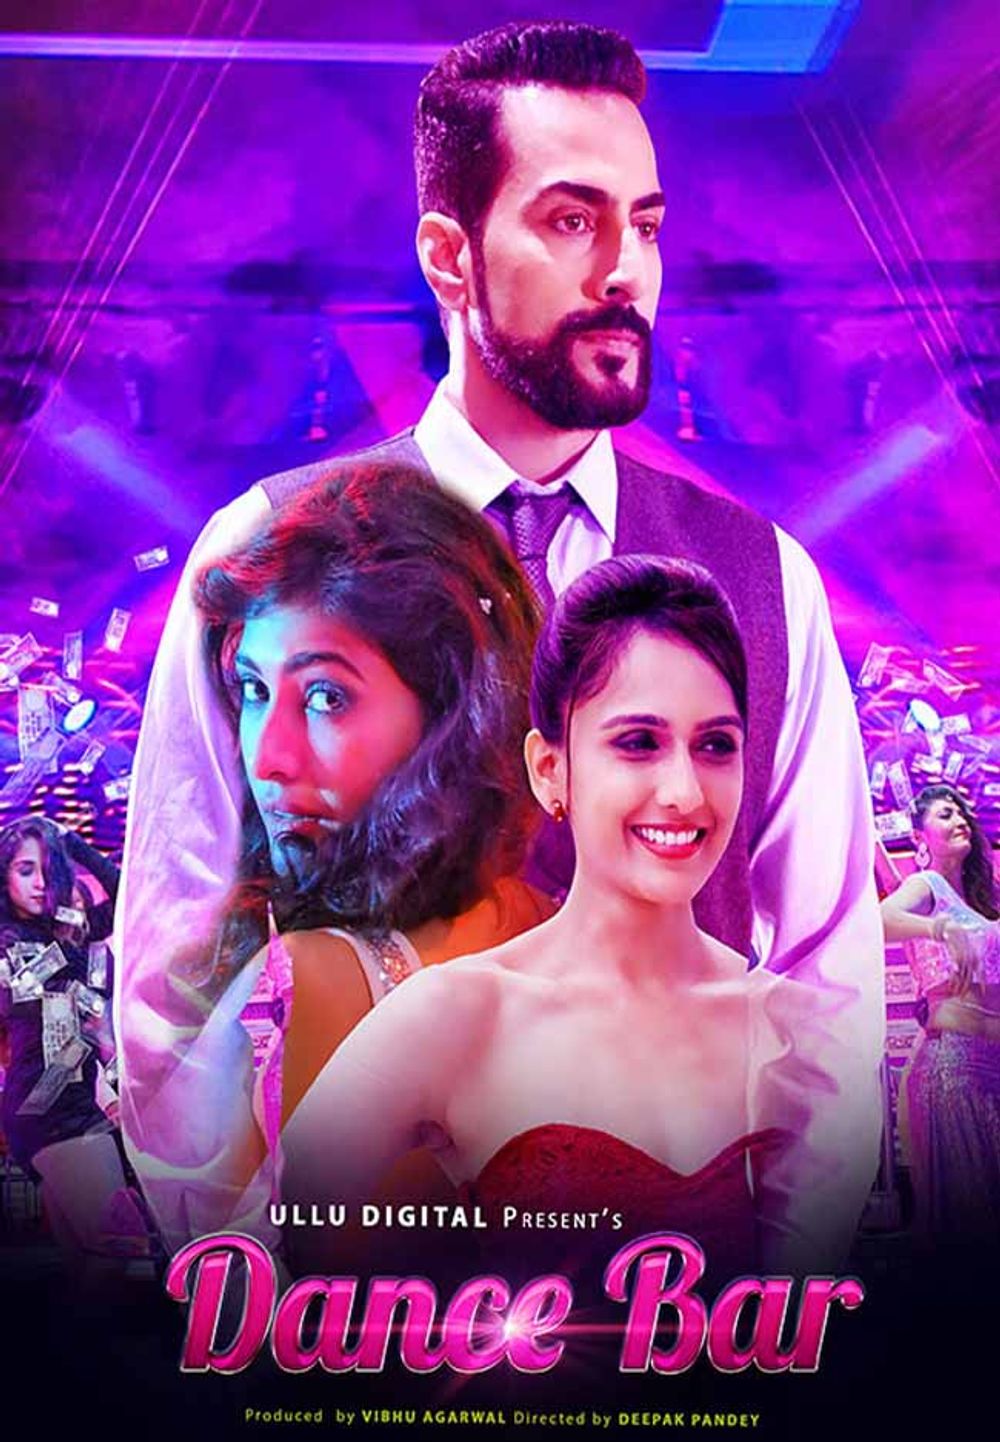 Dance Bar Movie Review